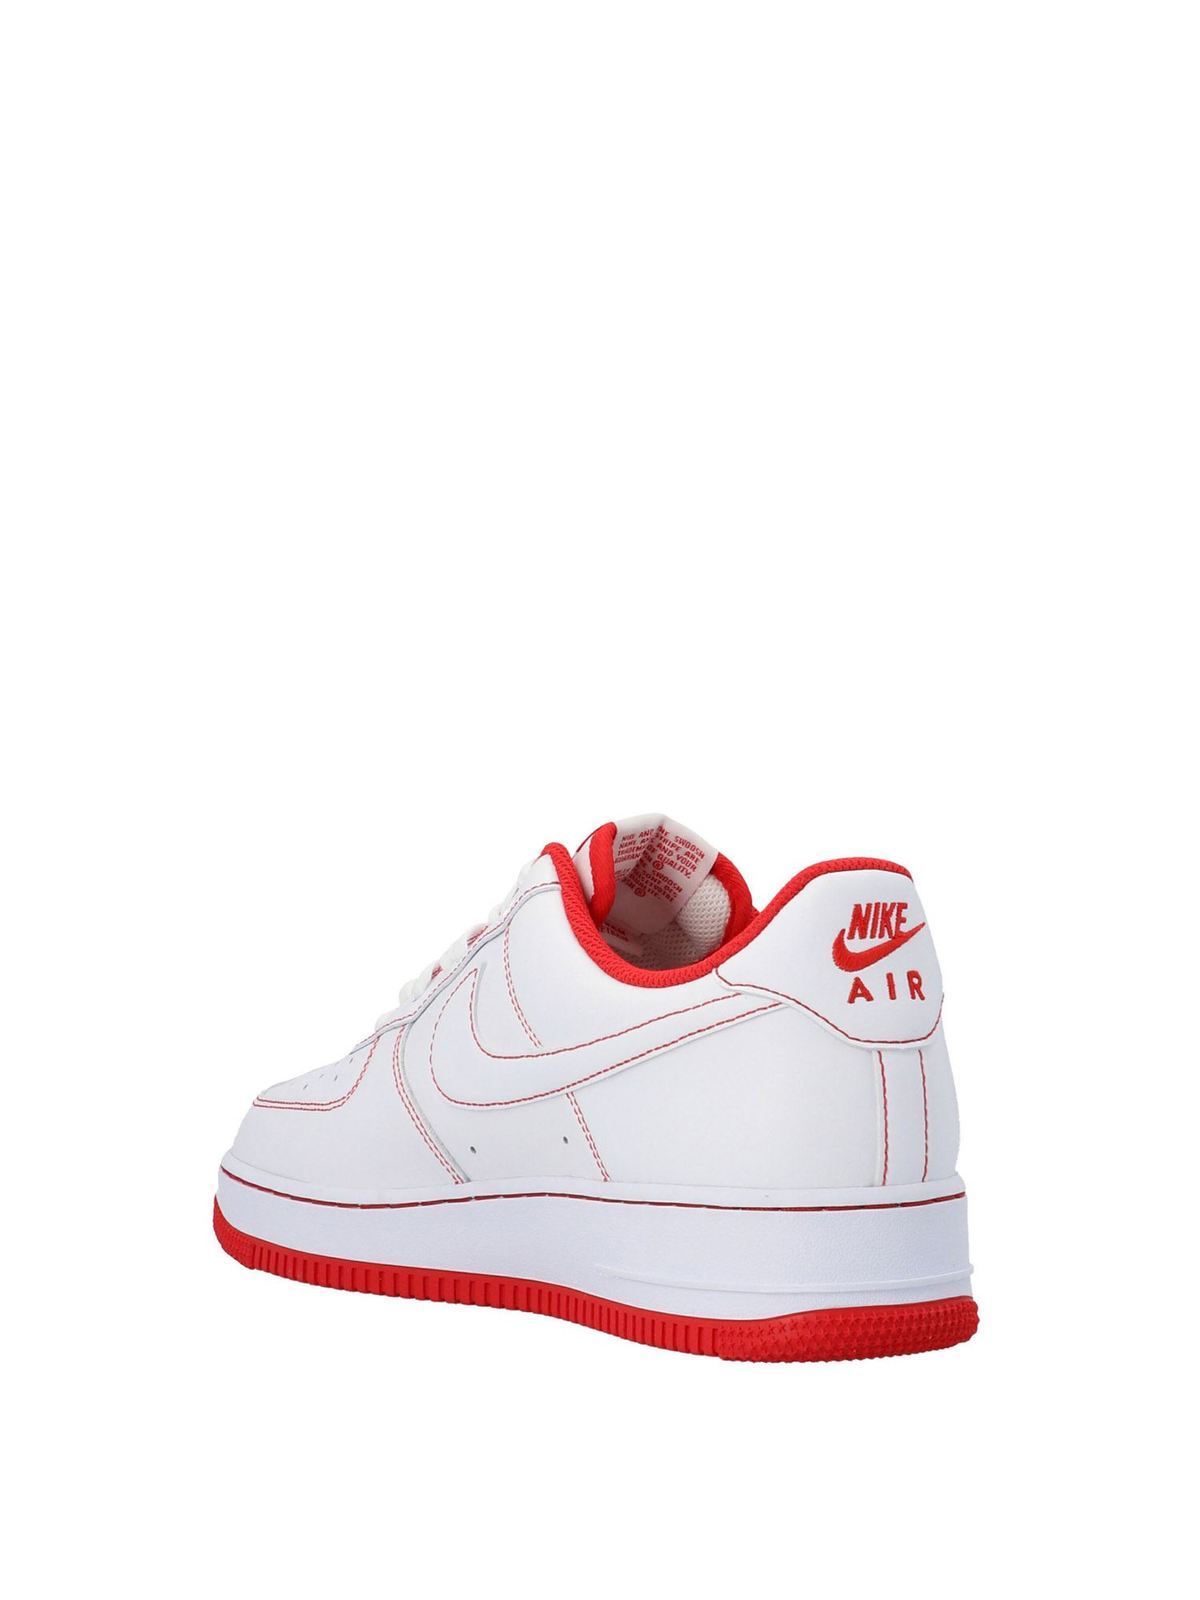 Sneakers Air Force 1 07 bianche e rosse